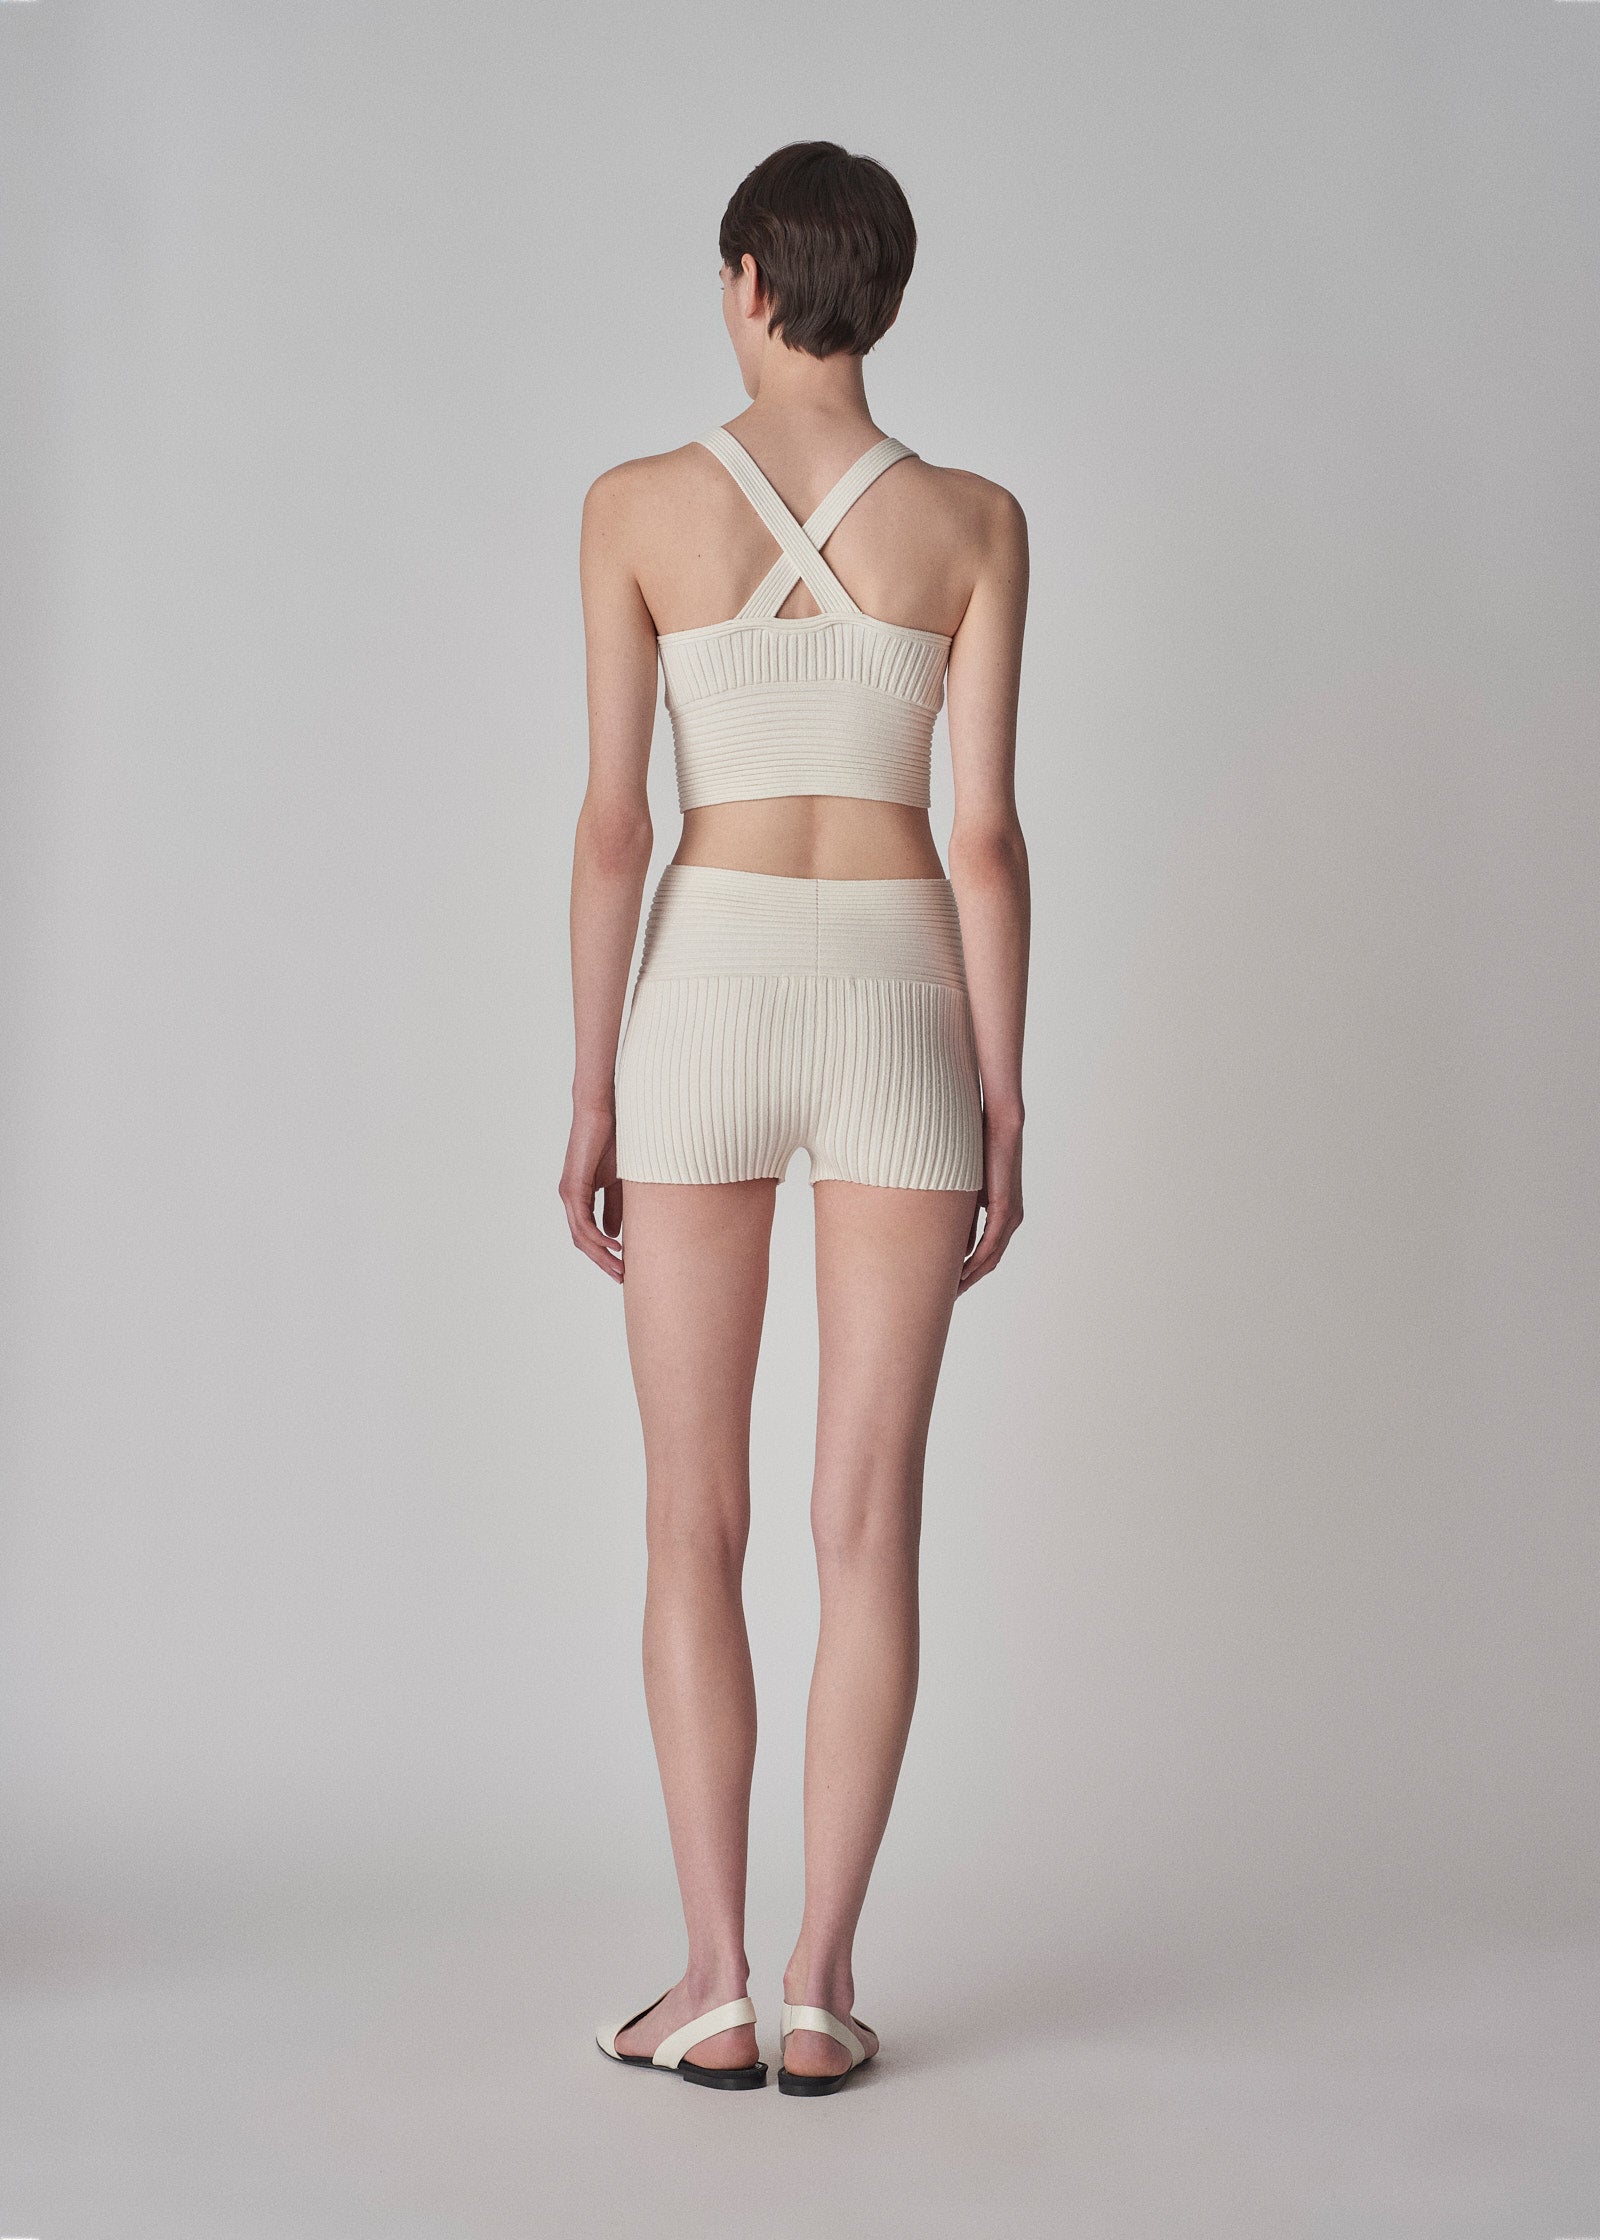 Bralette in Rib Silk Knit - Ivory - CO Collections